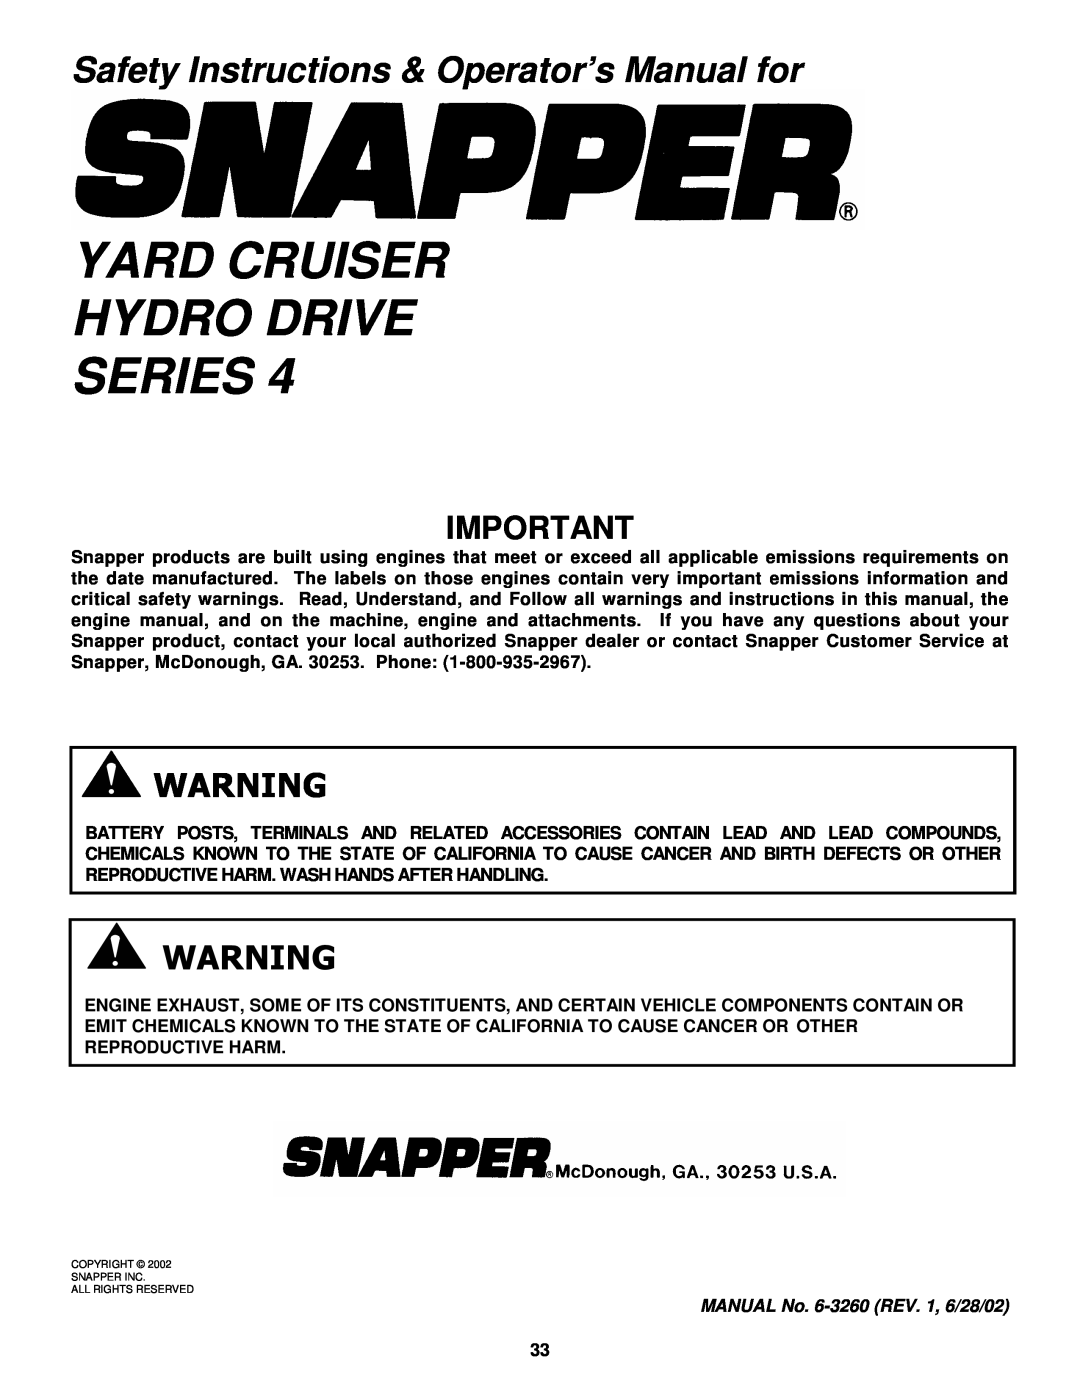 Snapper YZ20484BVE, YZ16424BVE Yard Cruiser Hydro Drive Series, Safety Instructions & Operator’s Manual for 